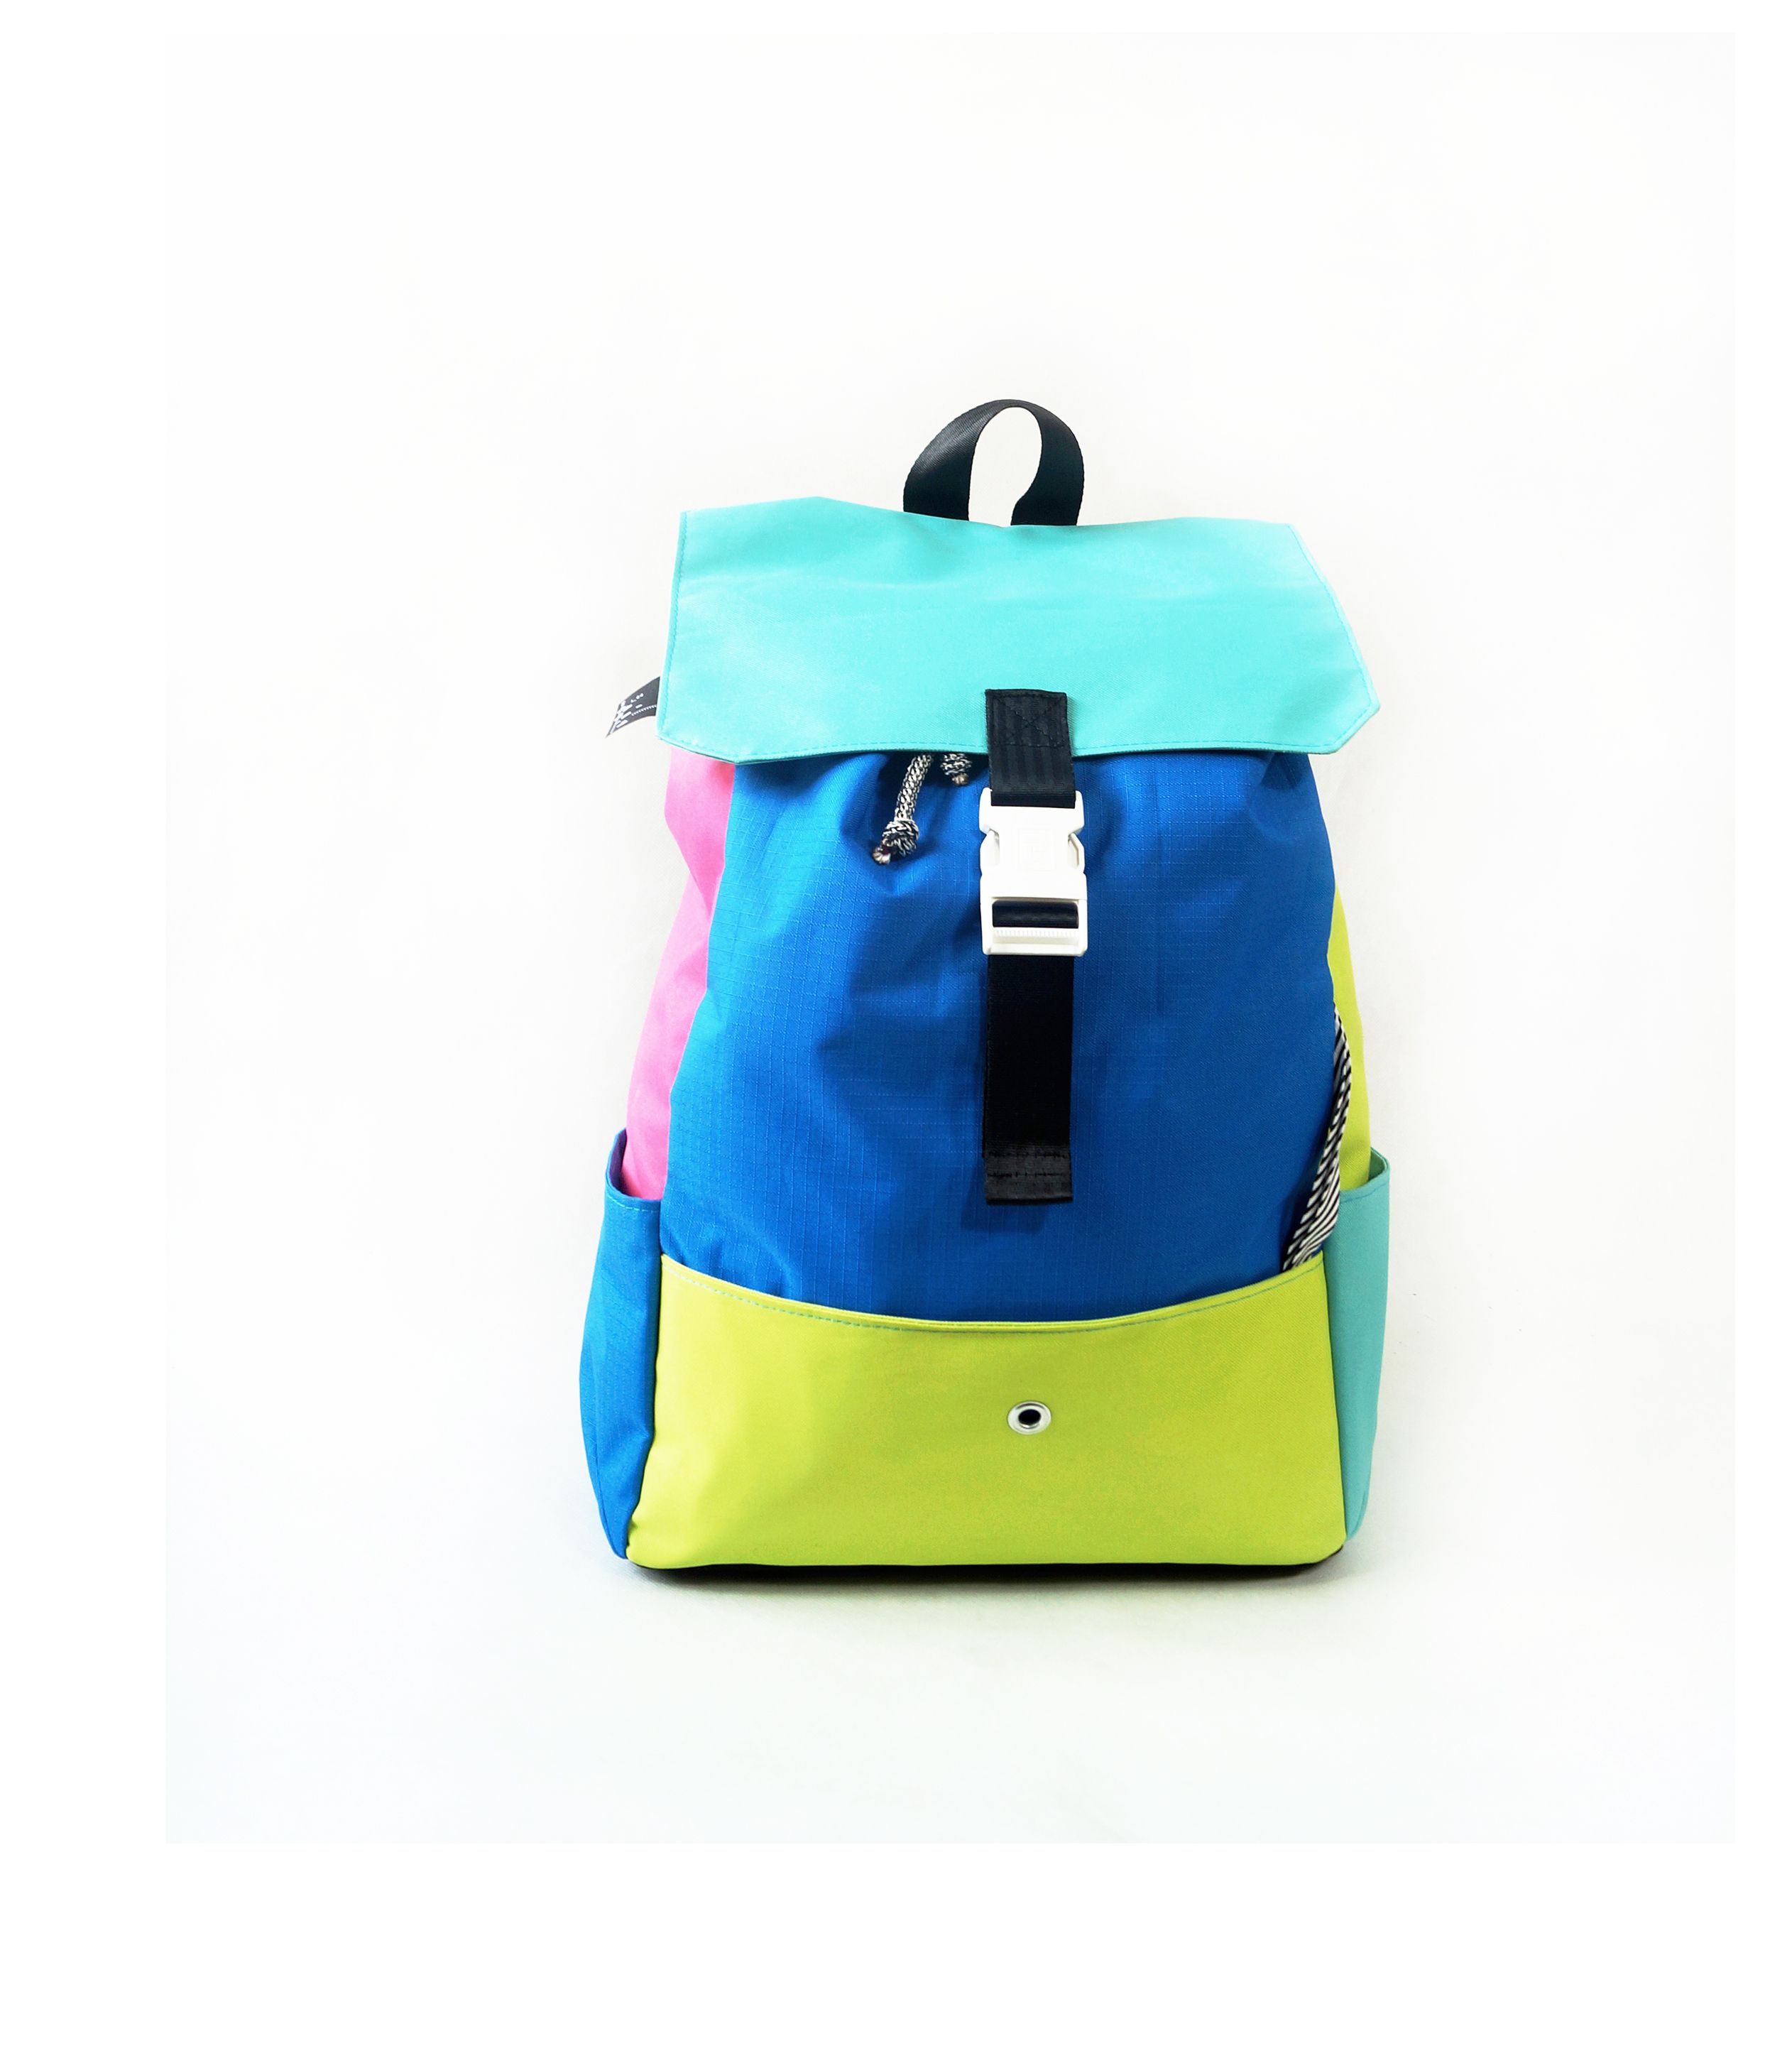 ALMOST BLACK xxl. Very Large. XXL colorful everyday backpack for her. For women. Also suitable for city small travel.